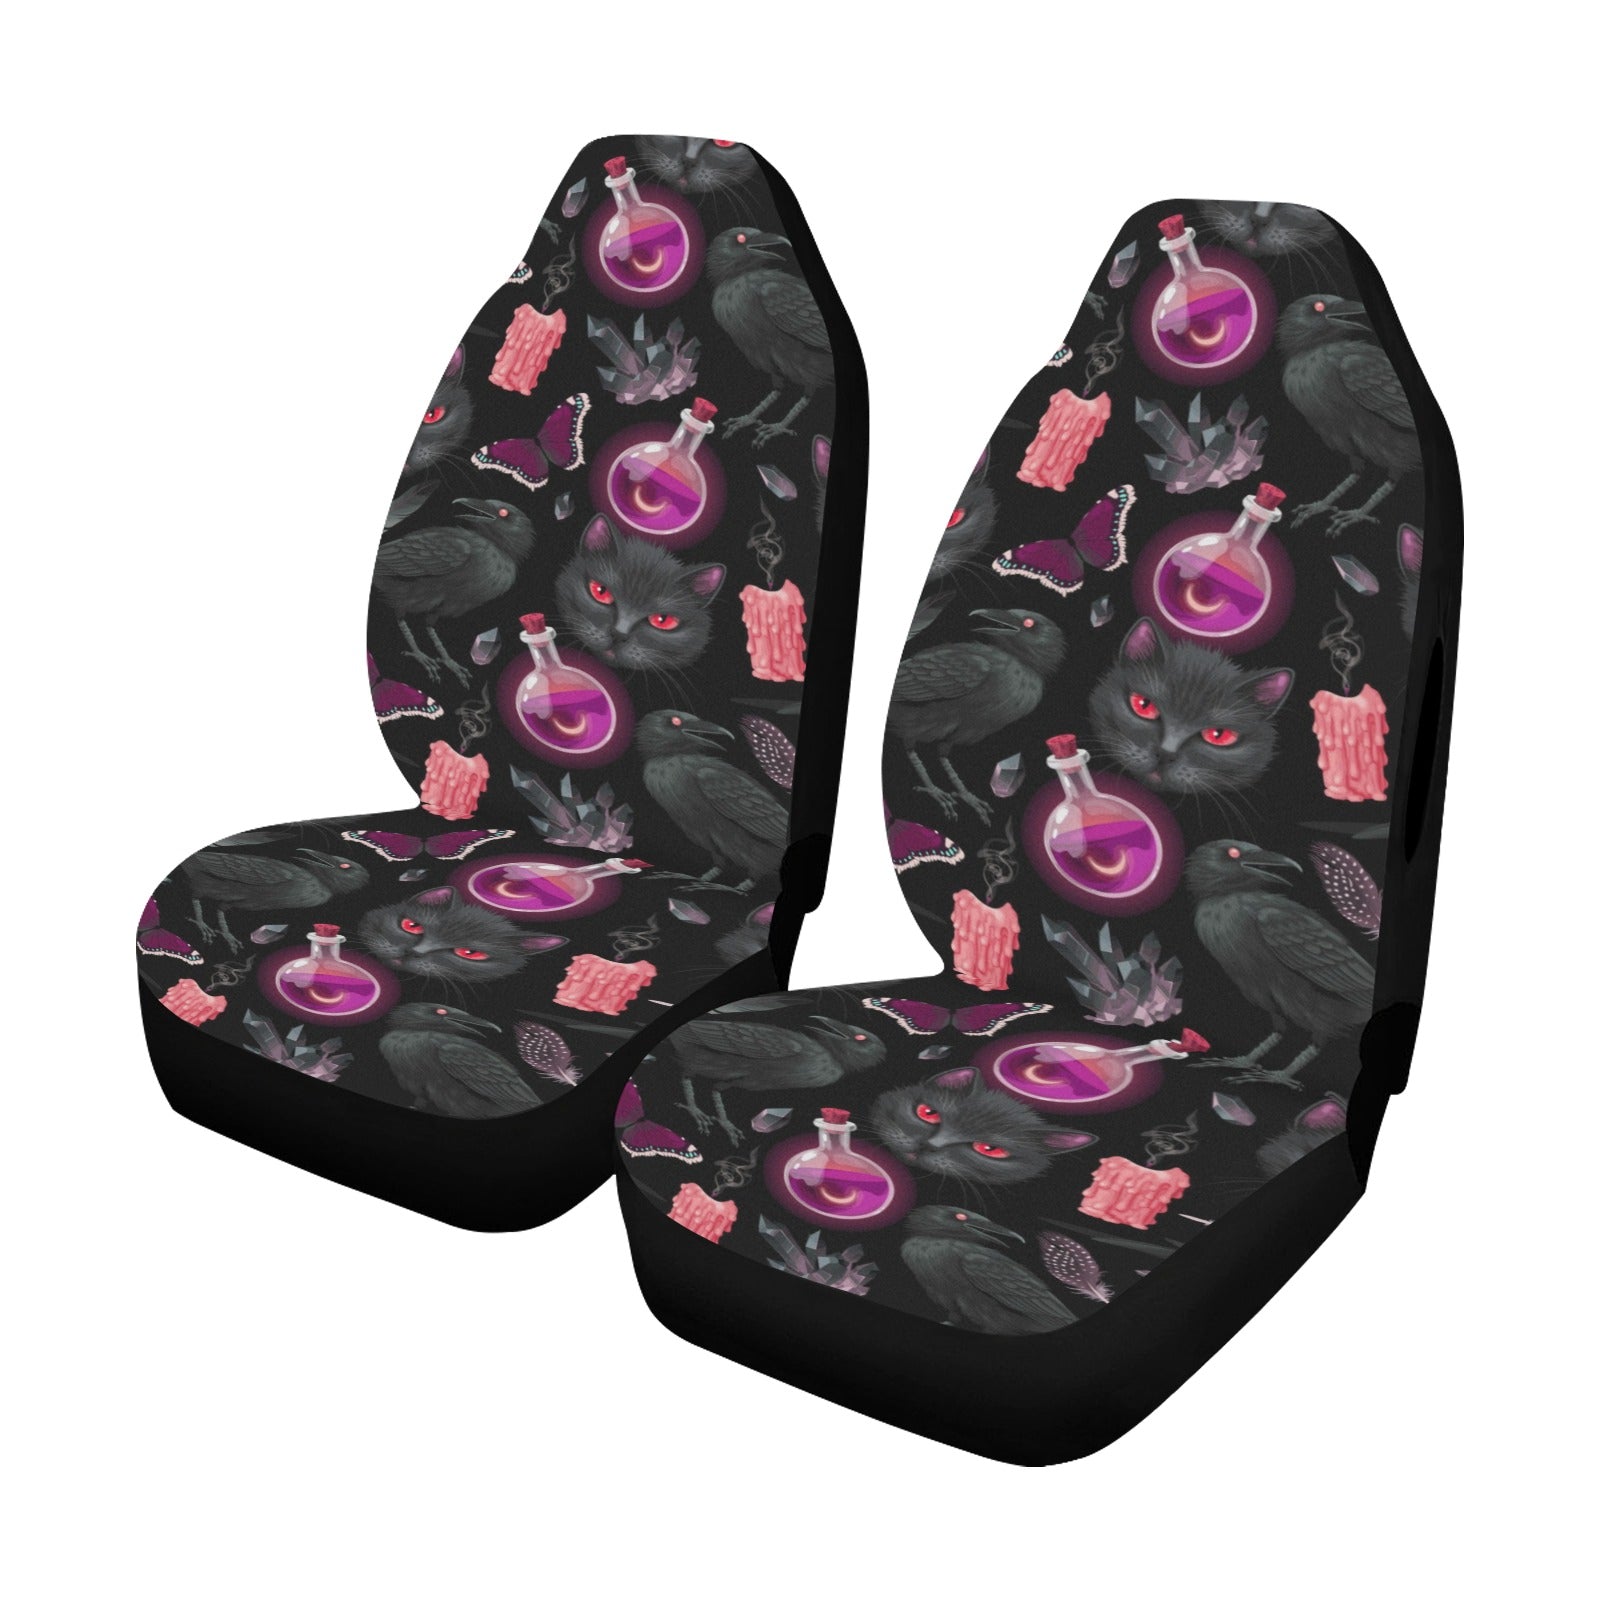 Magic occult cat witch Car Seat Covers Halloween Car seat covers-MoonChildWorld